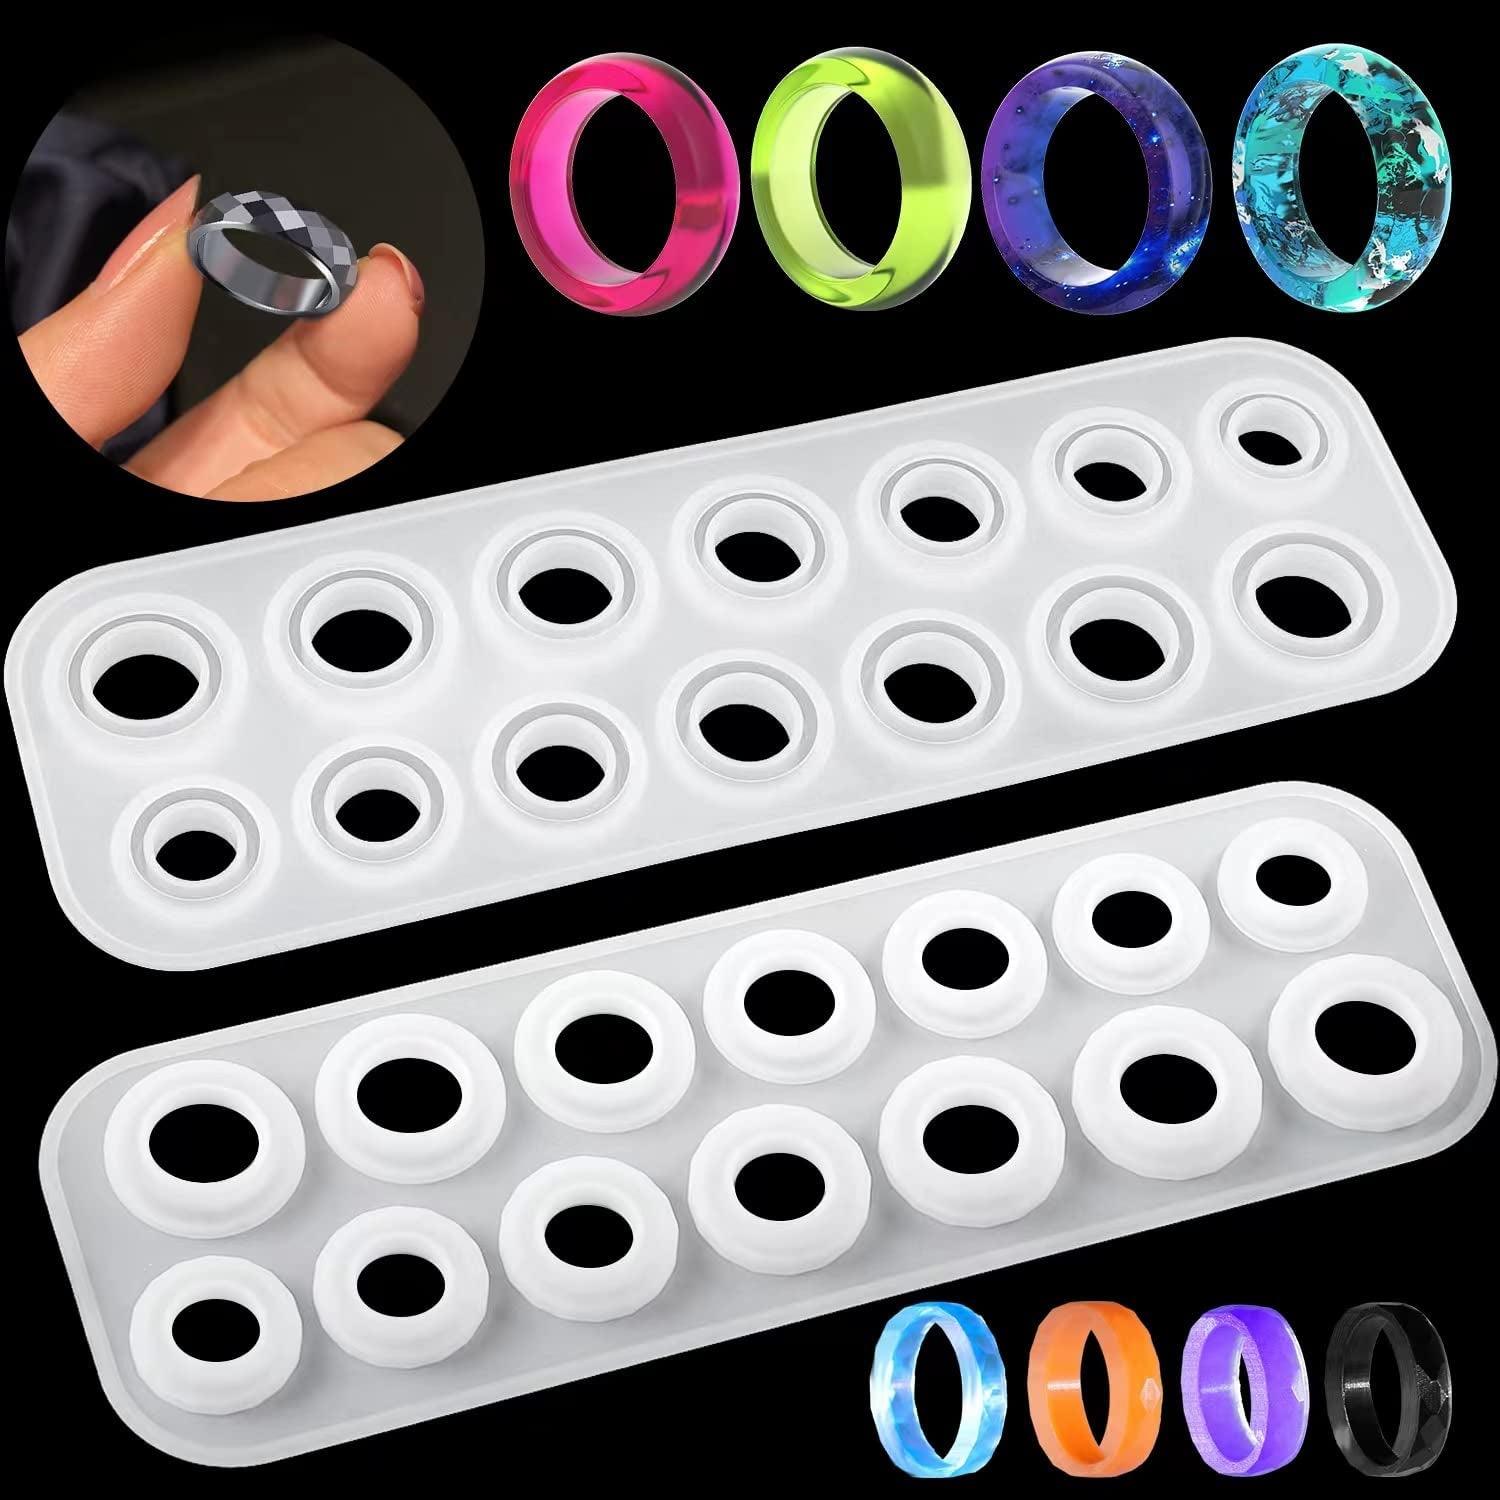 Resin Ring Molds Silicone, Silicone for Epoxy Resin, 14 Sizes with round and Rhombic Faces Making Rings, Earrings, Pendants, Crafts Christmas Gifts - WoodArtSupply